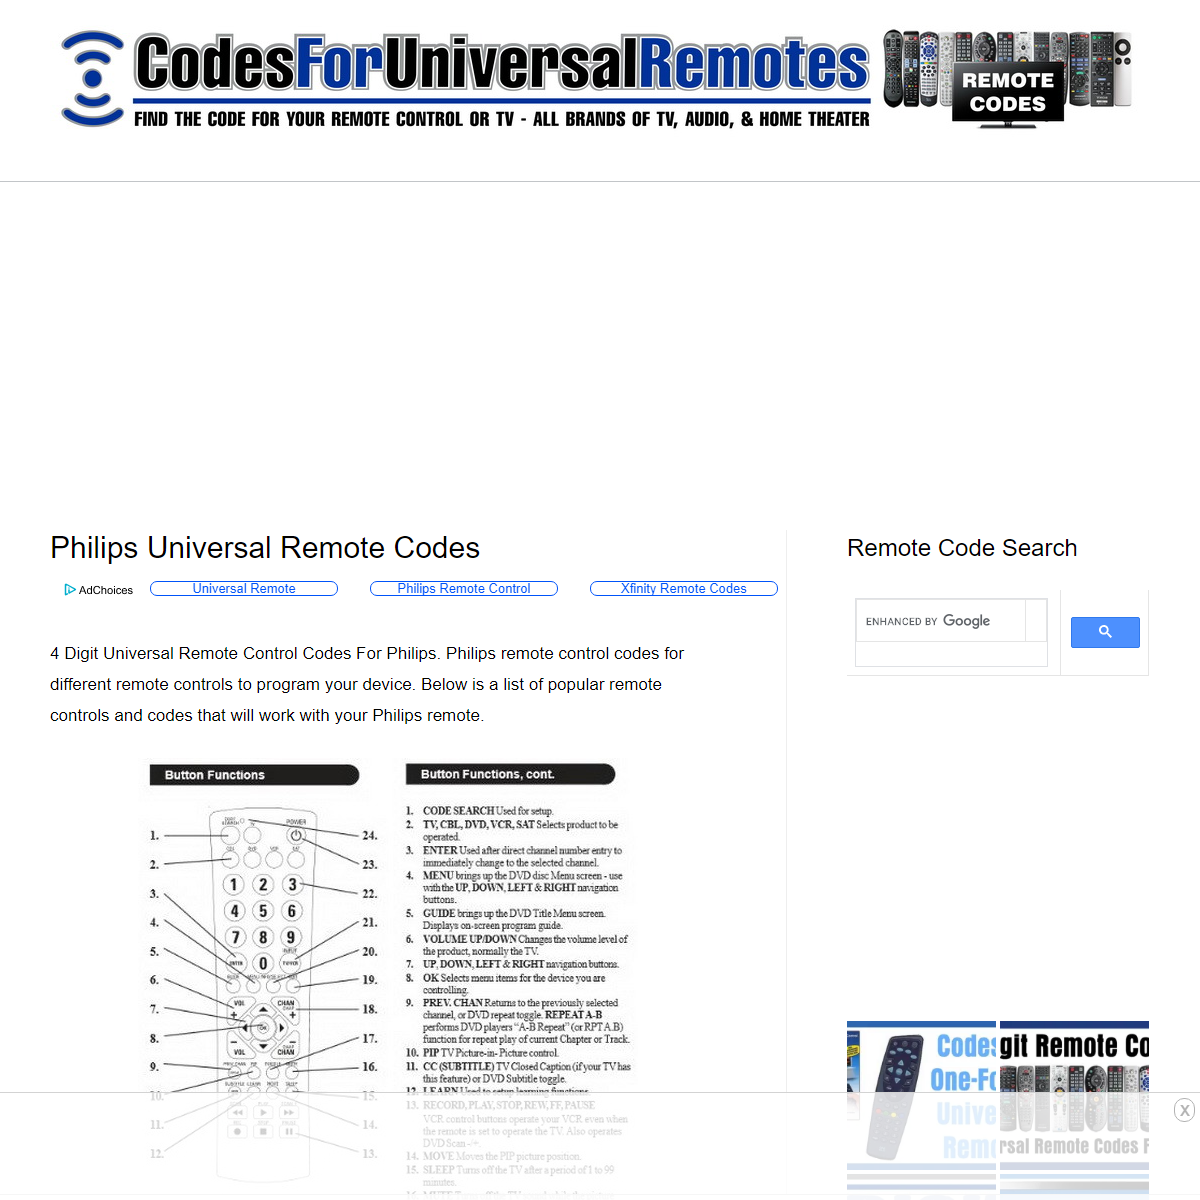 A complete backup of https://codesforuniversalremotes.com/philips-universal-remote-codes-2/